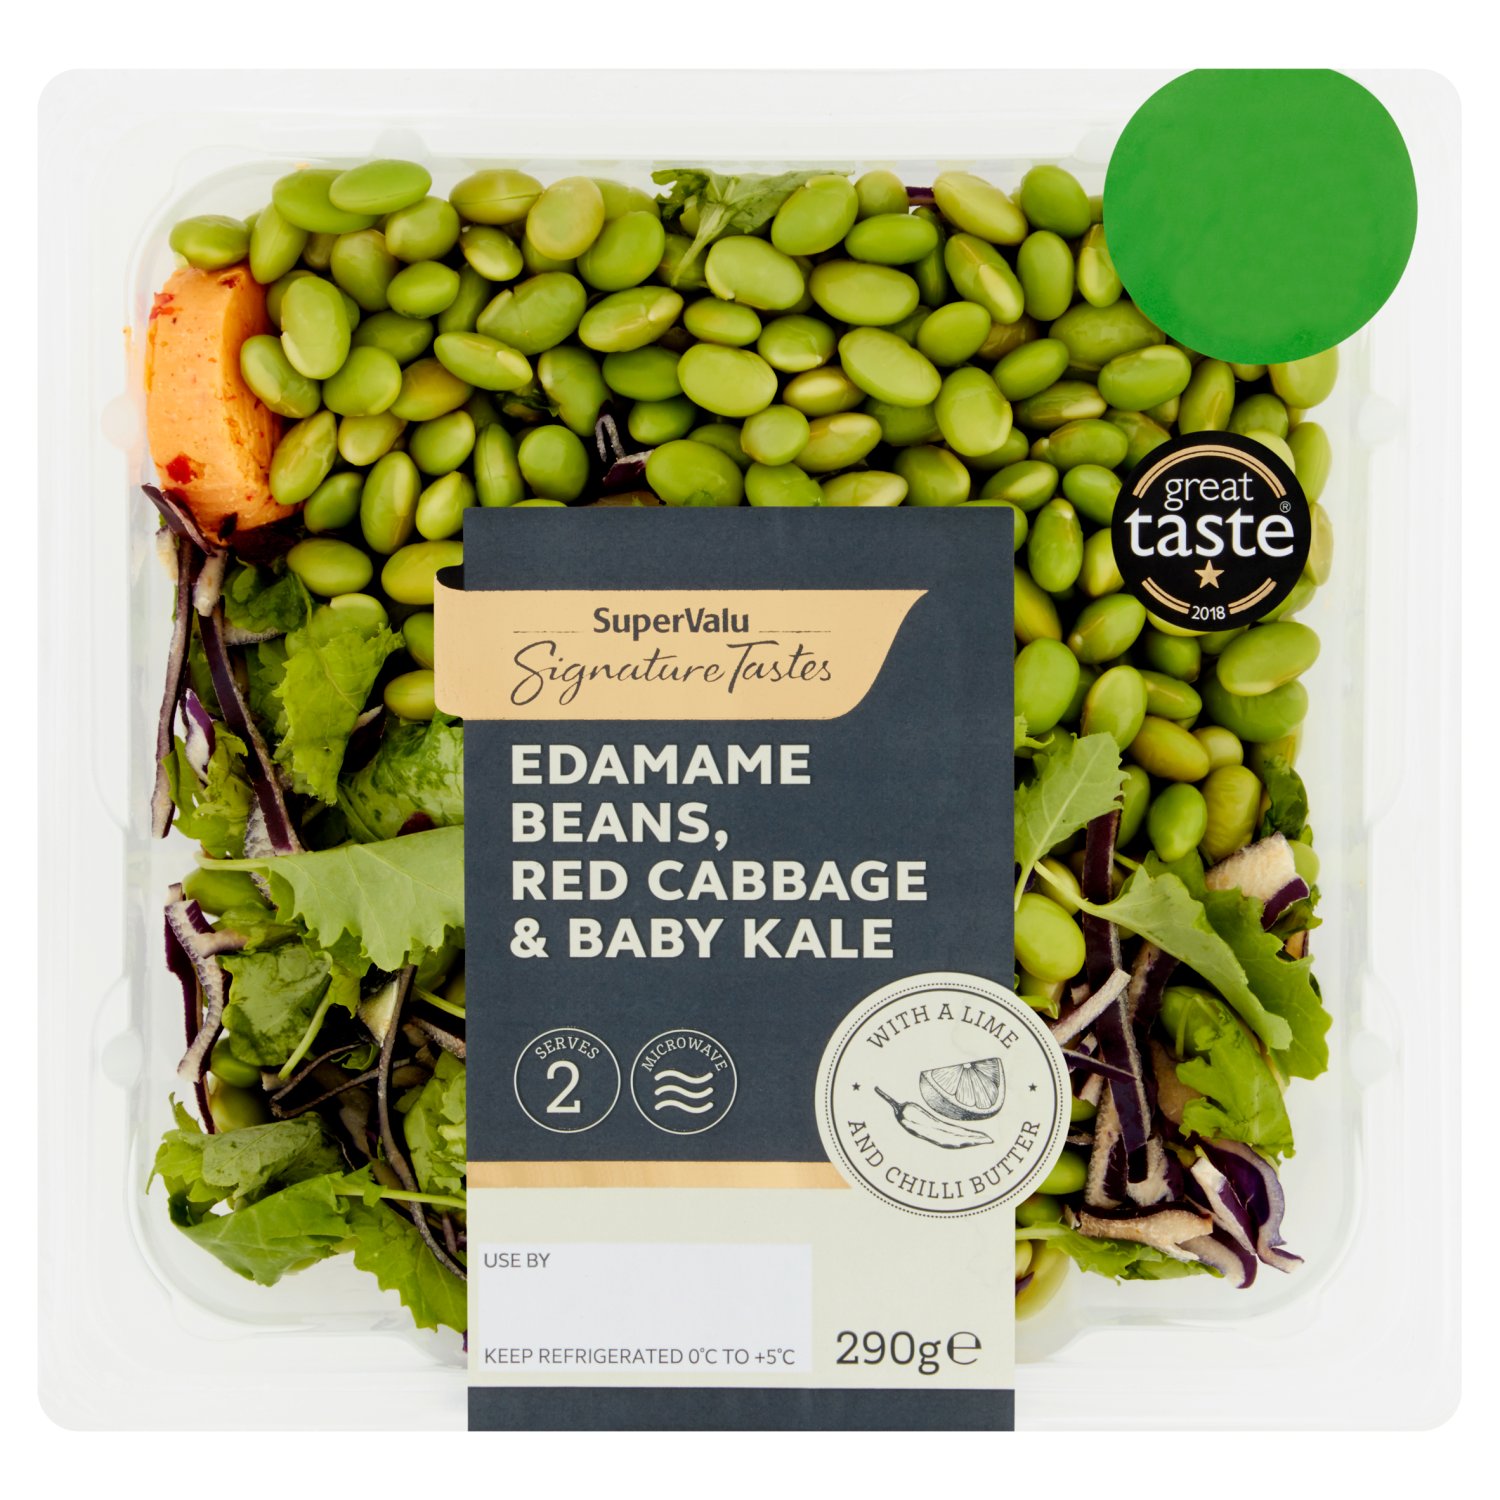 Signature Tastes Edamame Beans, Red Cabbage & Kale with Lime & Chilli Butter (290 g)